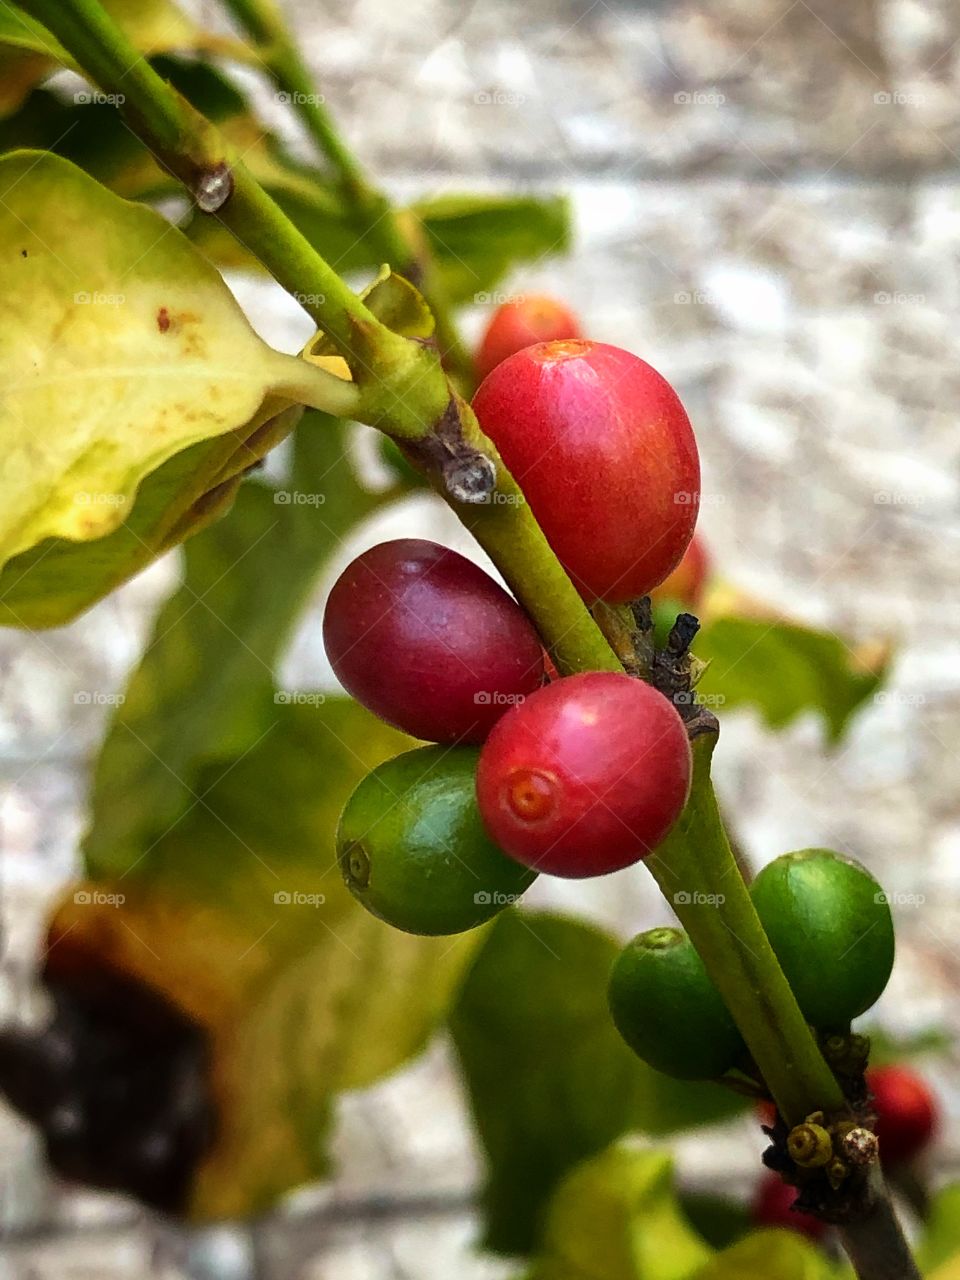 For someone who loves to drink coffee, it is fascinating to see it in the first stages: the flower, the small fruits, those fruits growing, becoming green and then red, tasting them and finding out it is sweet... From the coffee tree in my backyard.